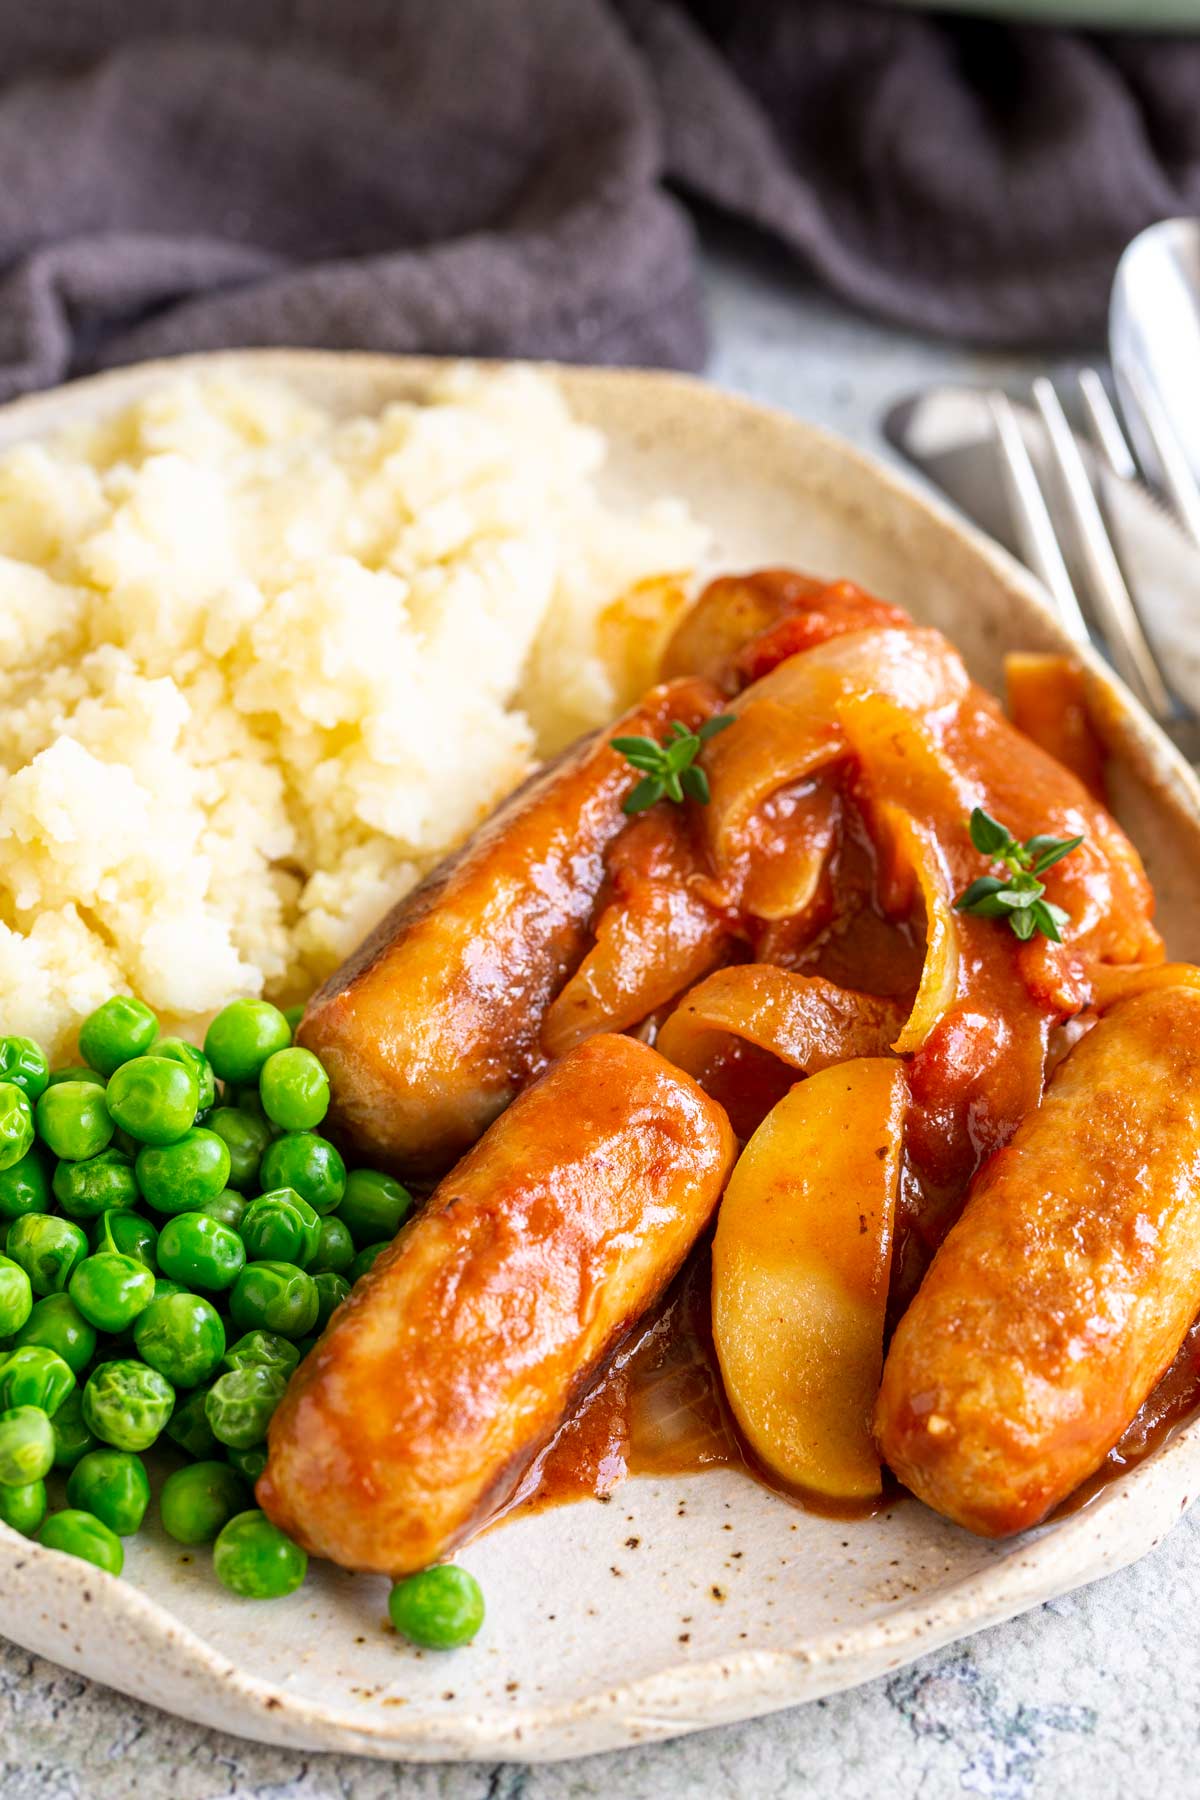 4 small sausages in a sauce on a plate with mashed potato and peas